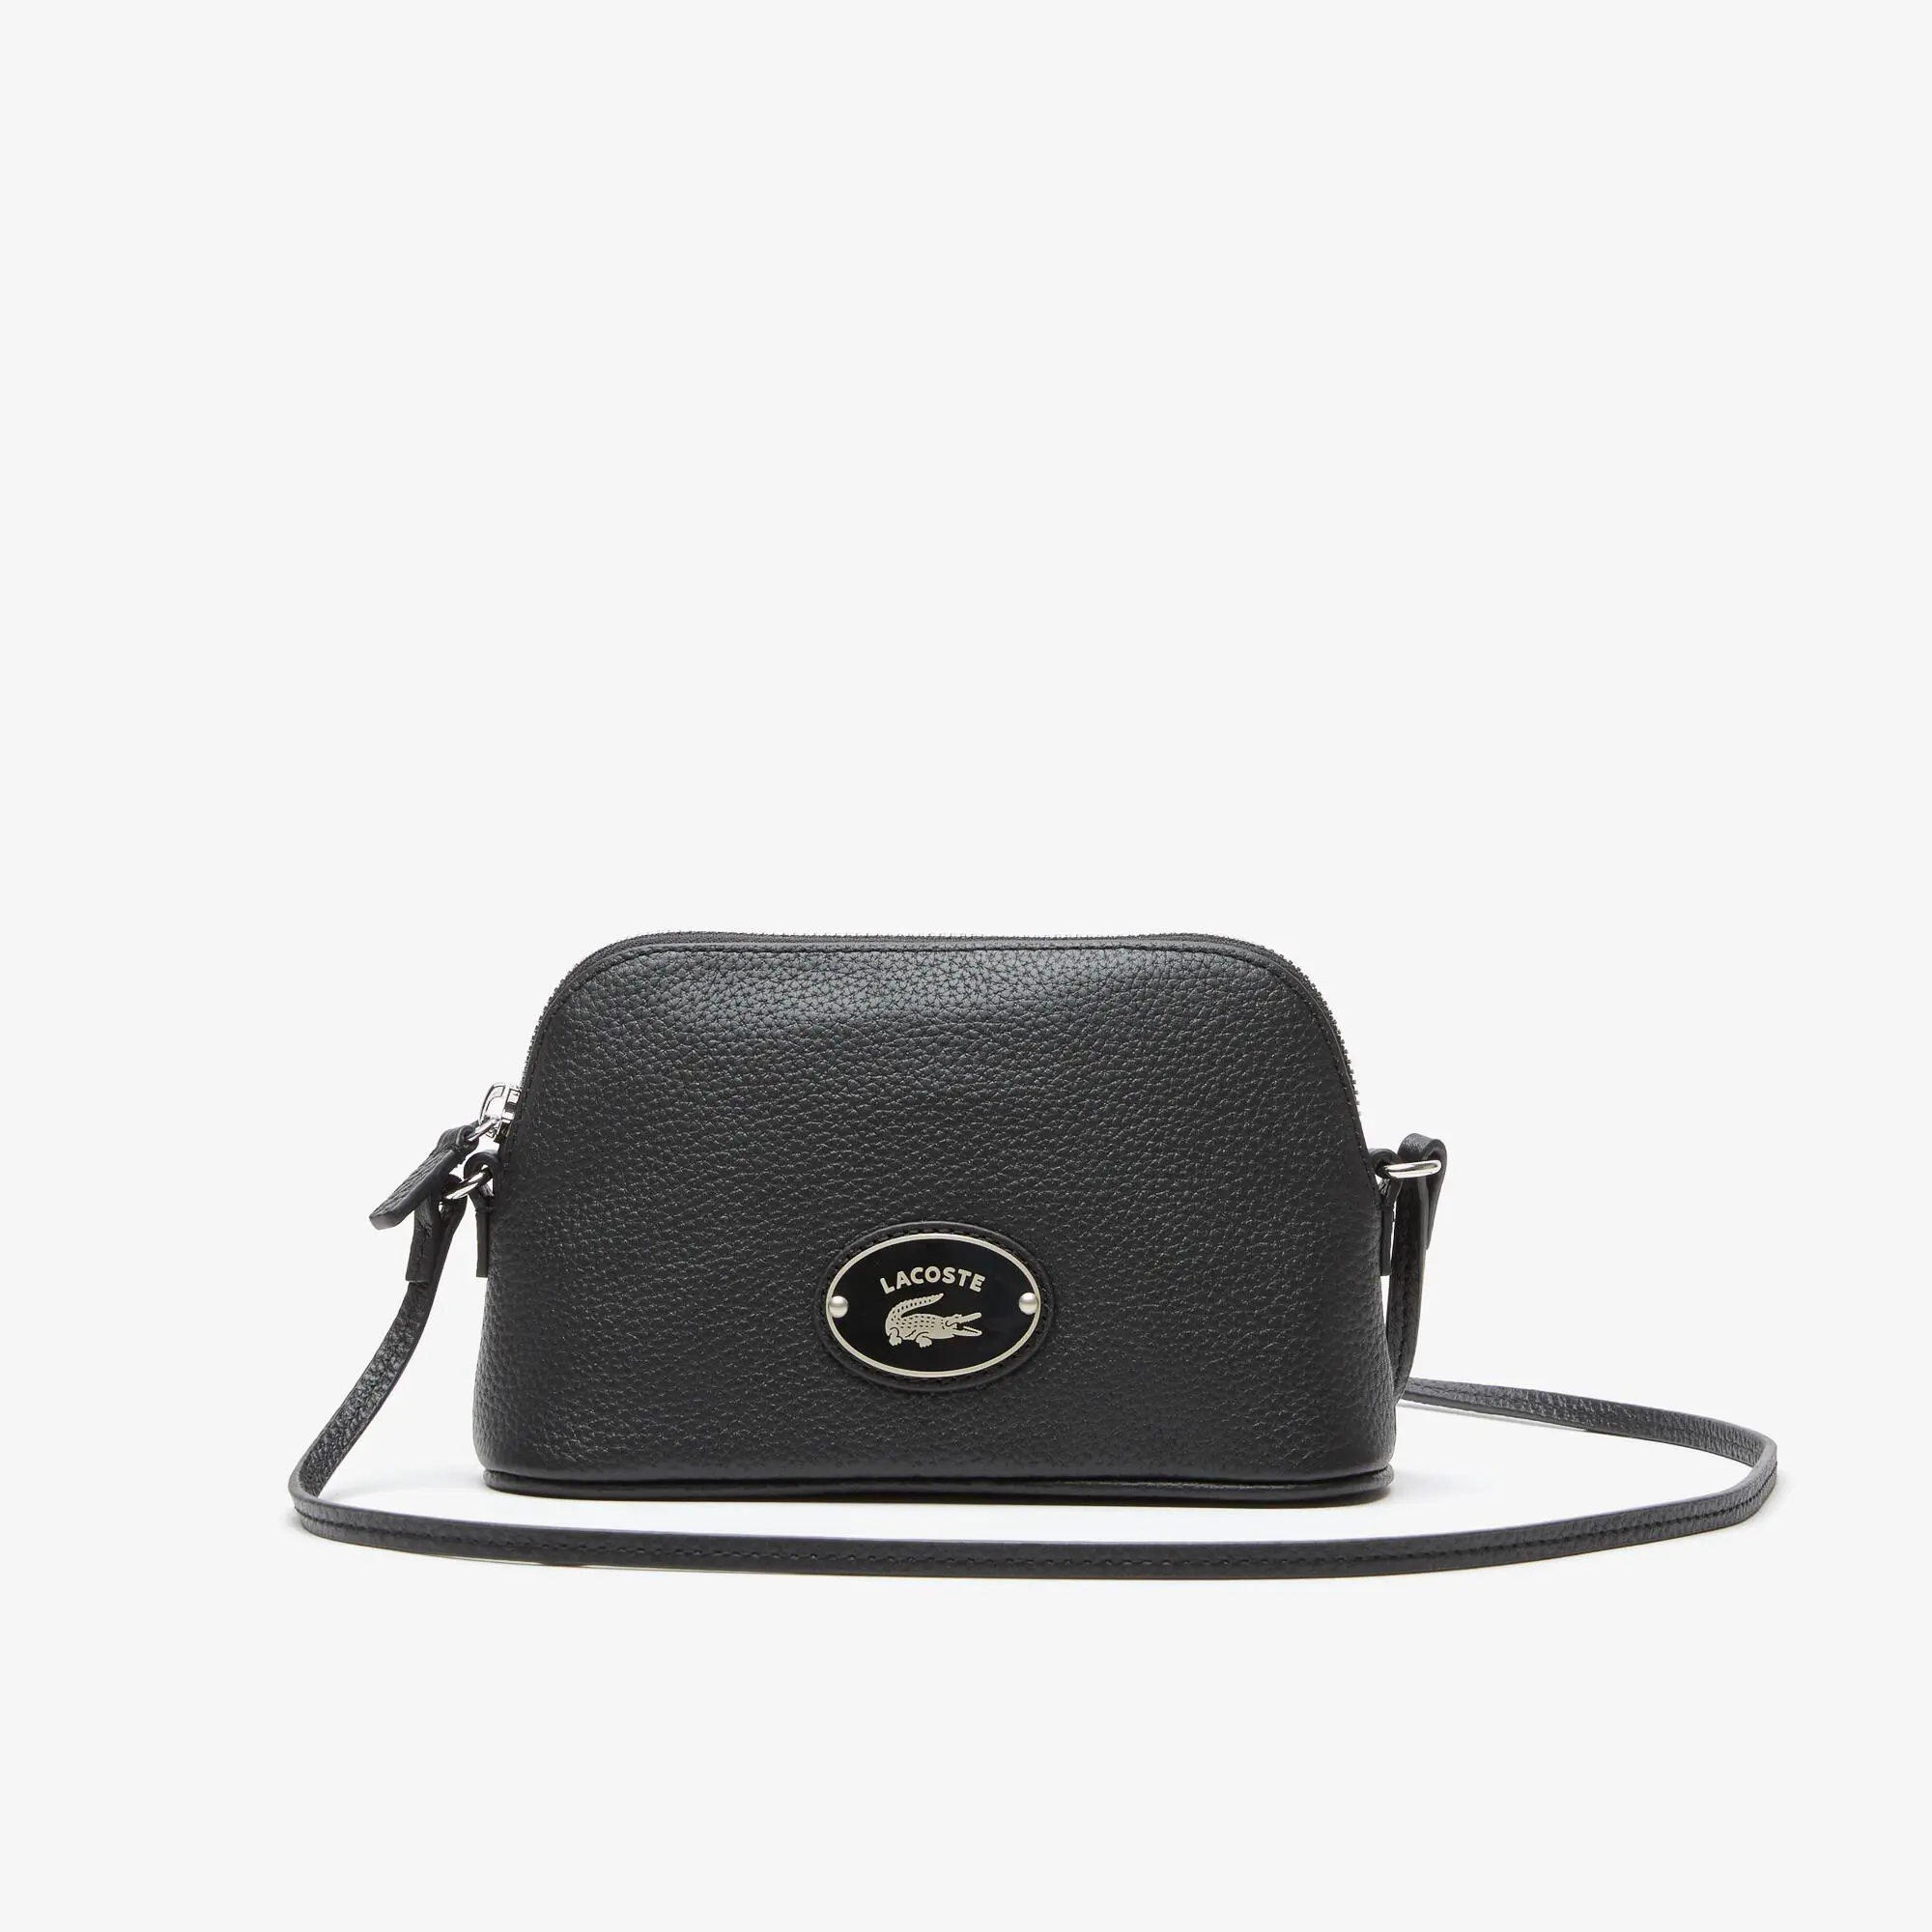 Lacoste Women's Lacoste Grained Leather Dome Crossover Bag. 2